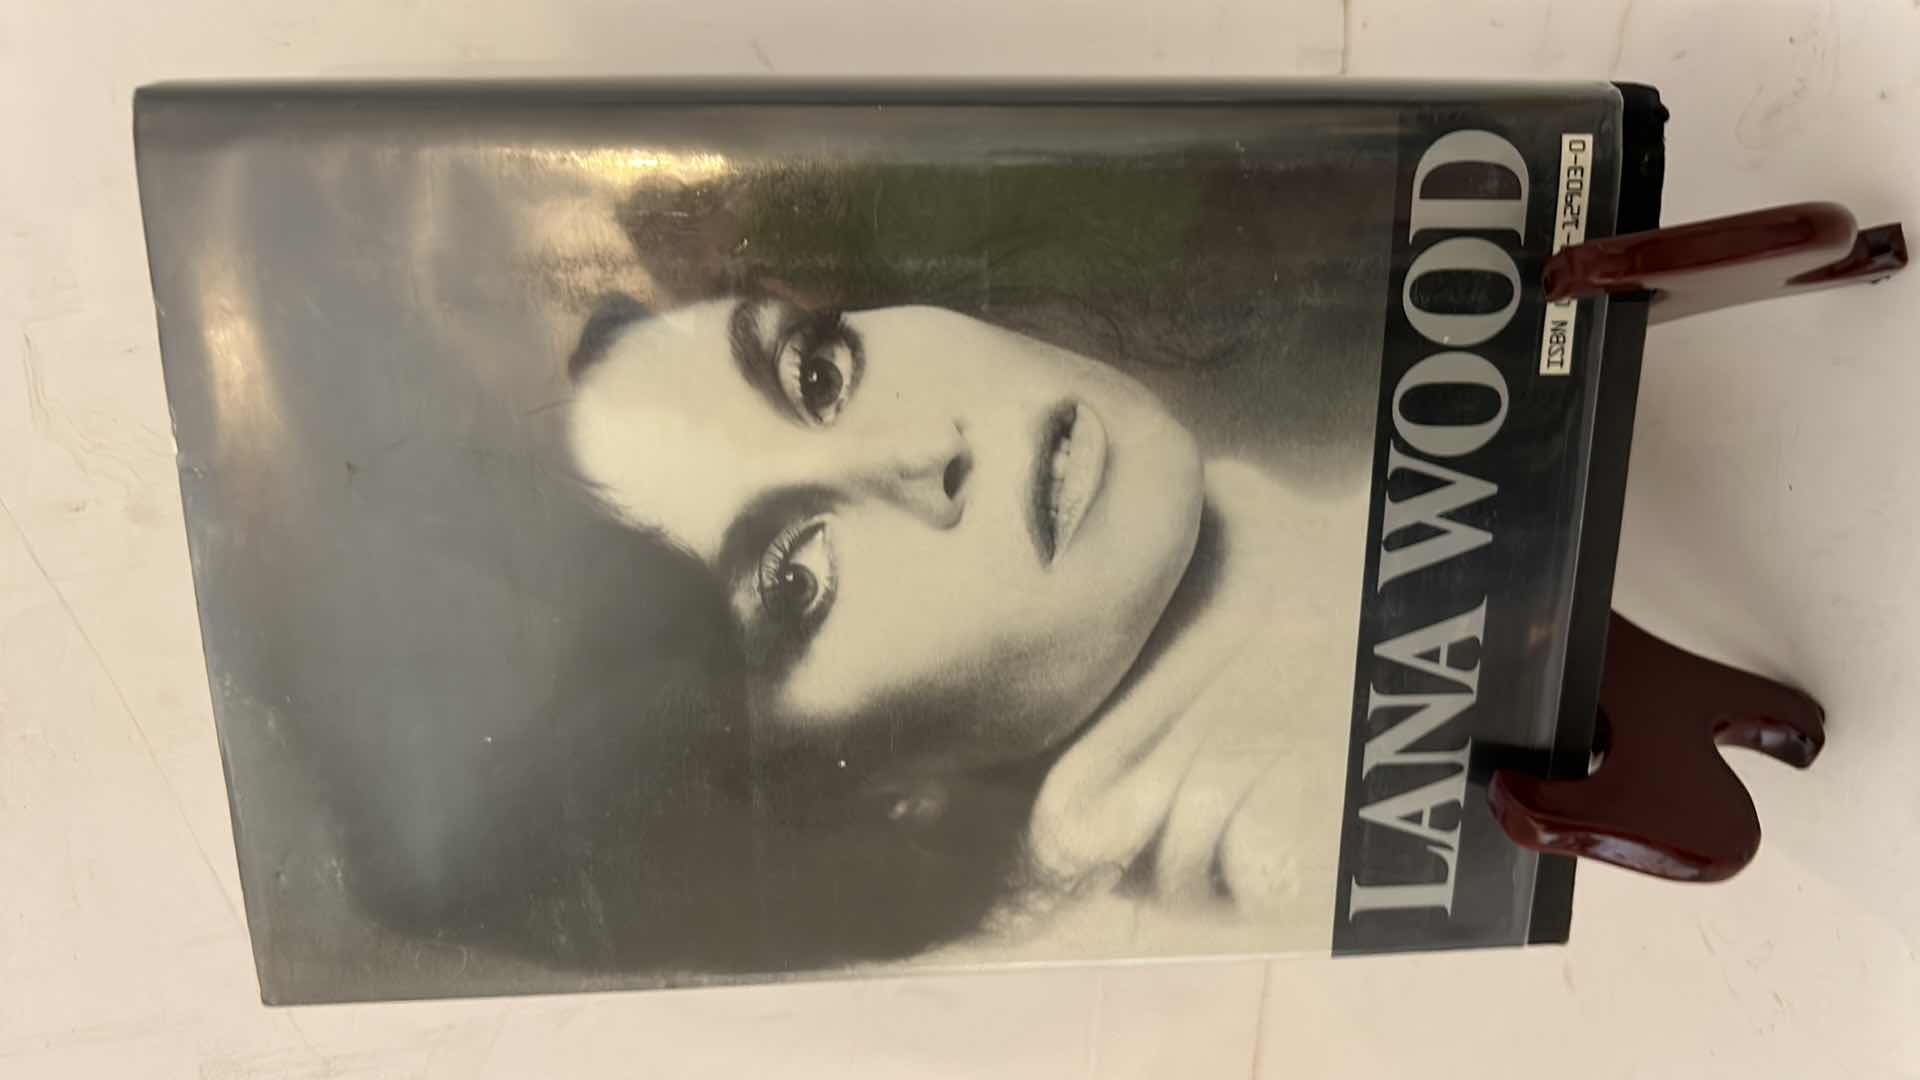 Photo 3 of AUTOGRAPHED HARDCOVER BOOK, “ NATALIE WOOD, A MEMOIR BY HER SISTER” LANA WOOD